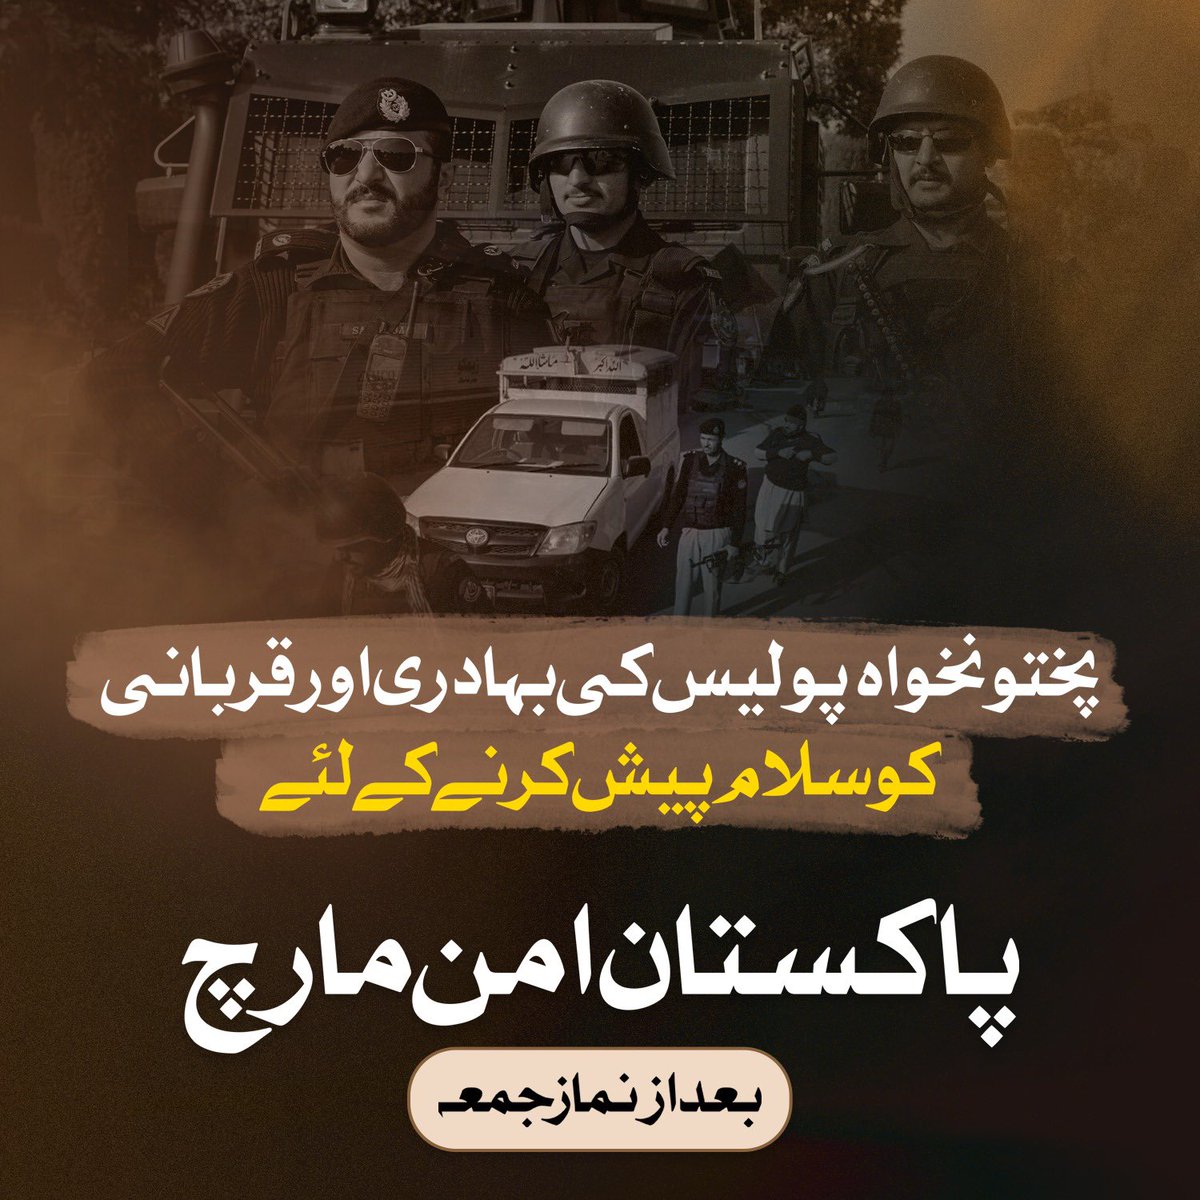 Salute and commend the bravery of KP Police. They have time and time again sacrificed their lives to protect the citizens of Pakistan against all militant activity. There are not enough words to express gratitude and thankfulness for all their sacrifices. #PeshawarBleedsAgain